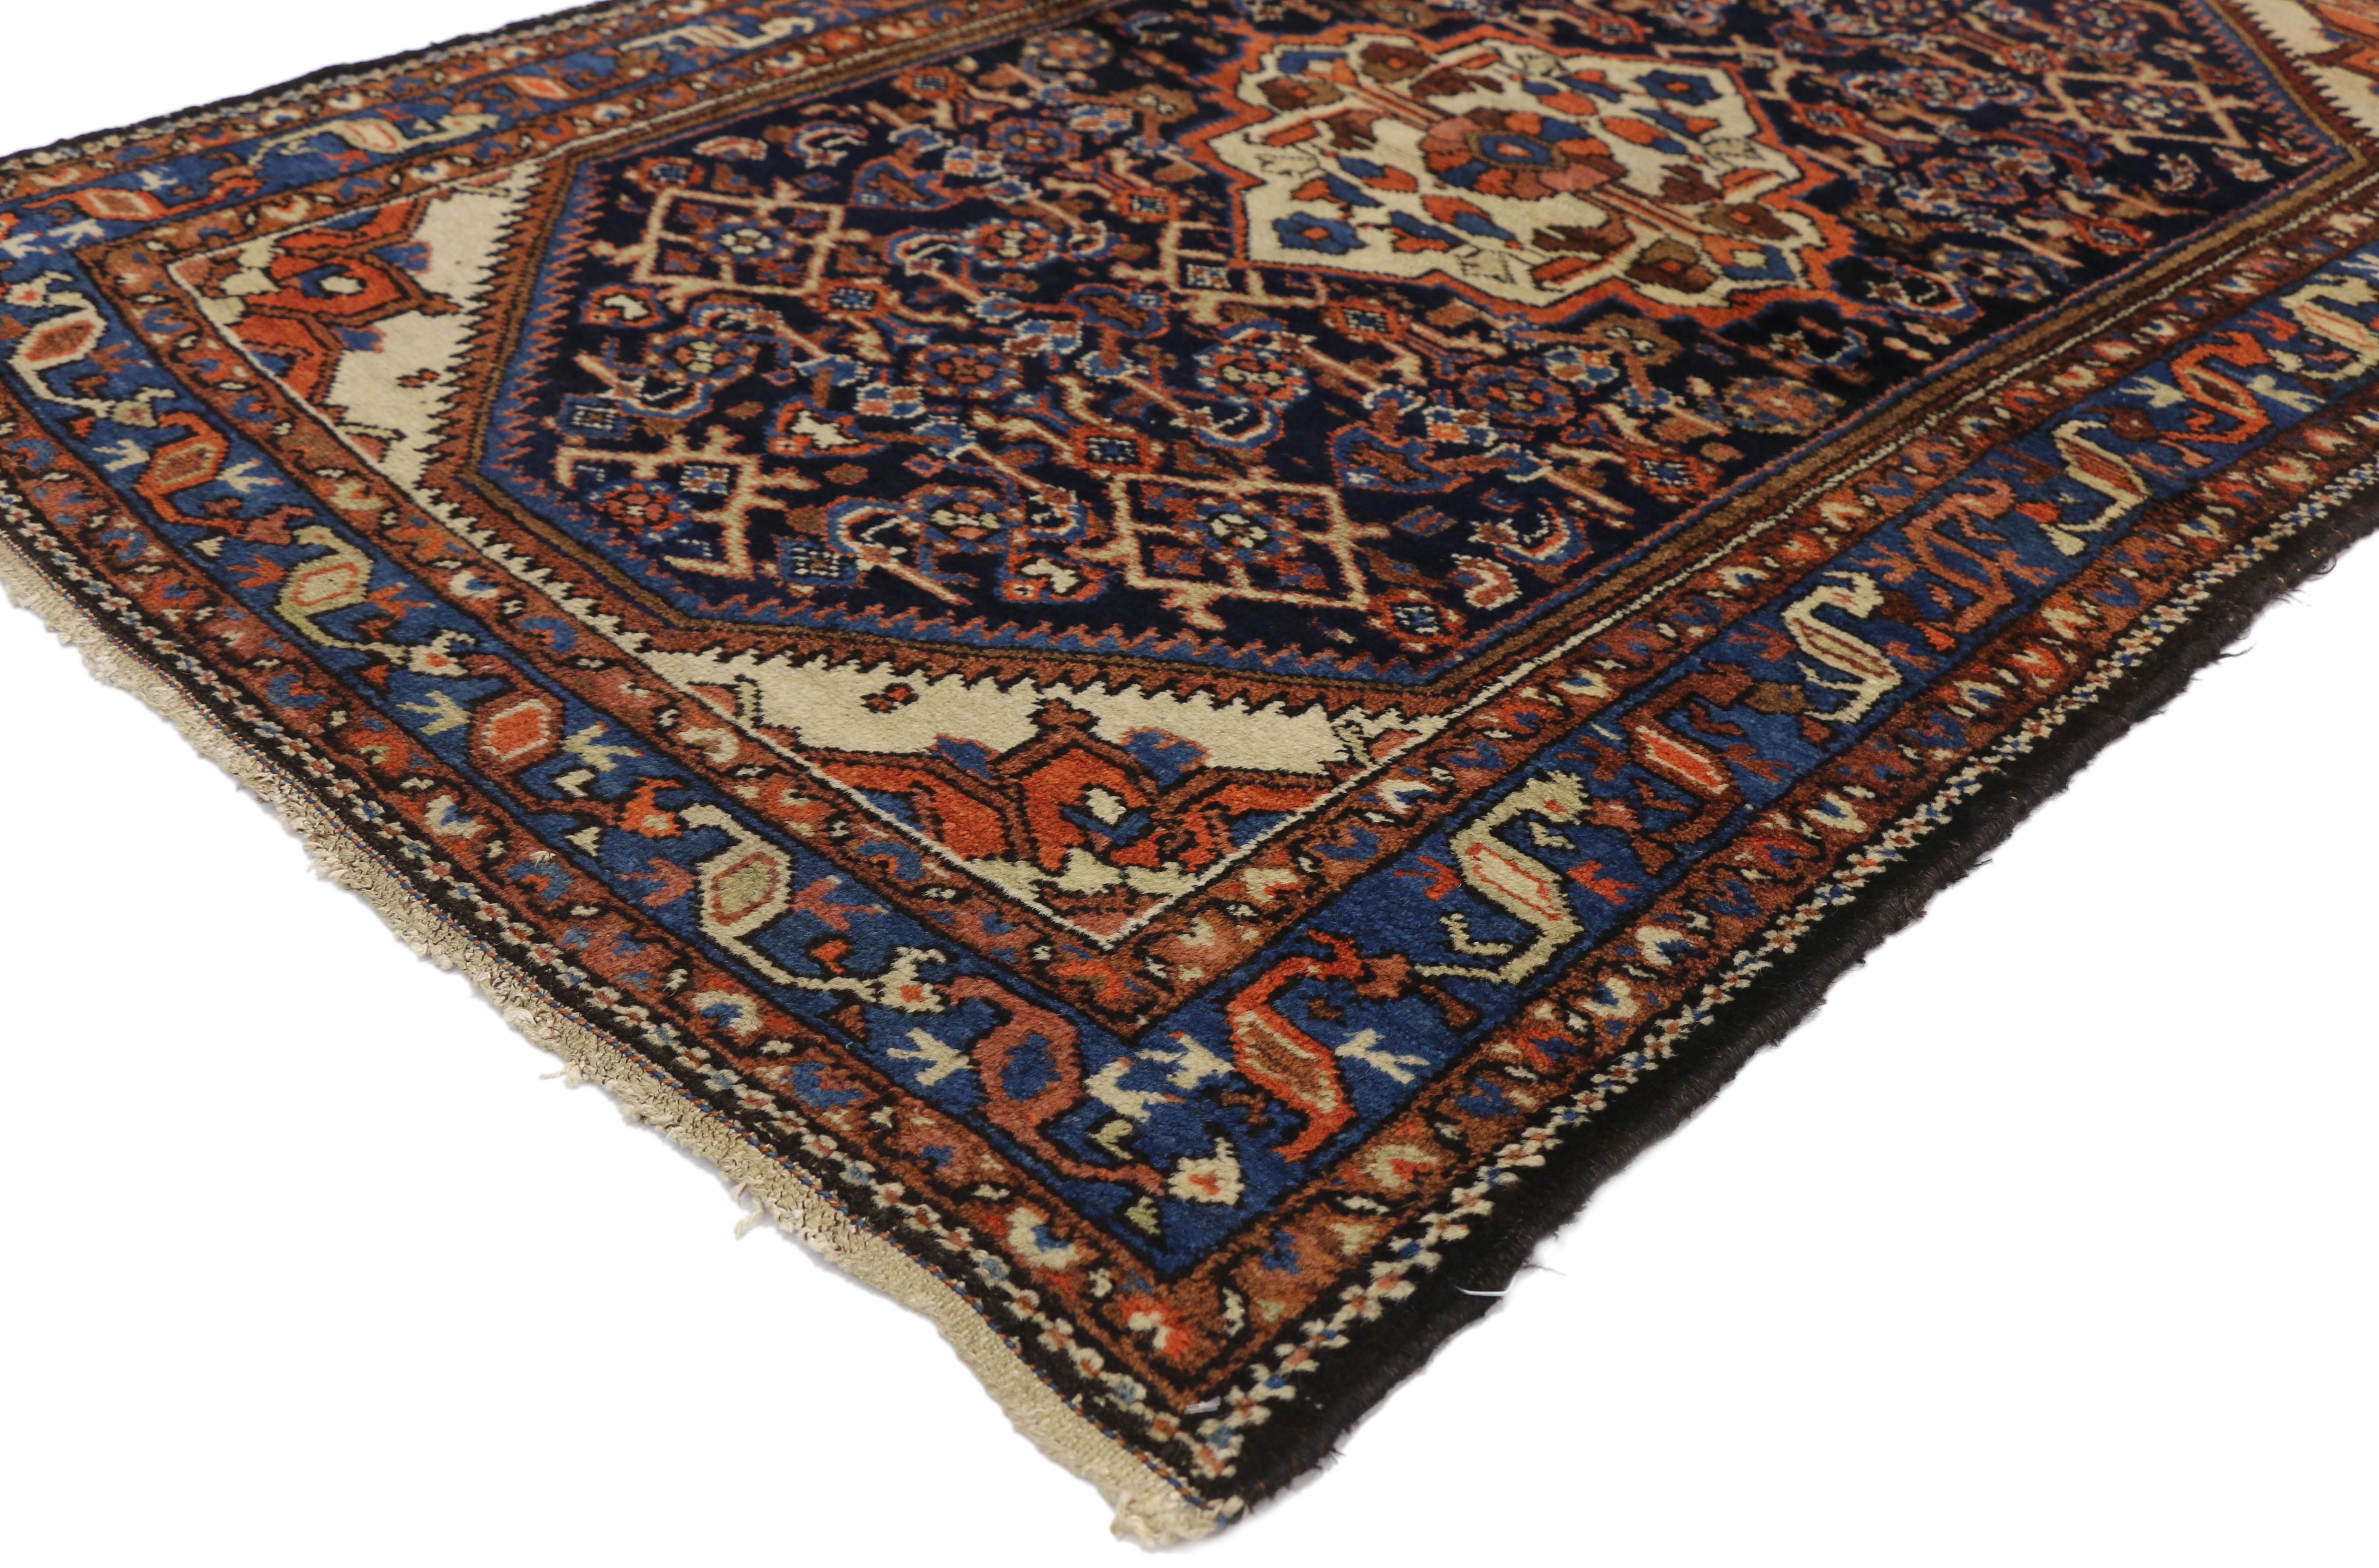 73432 antique Persian Bakhtiari rug for Kitchen, Bathroom, Foyer or Entry rug. This hand knotted wool vintage Persian Bakhtiari accent rug features a modern traditional style. Immersed in Persian history and timeless style, this small Persian rug